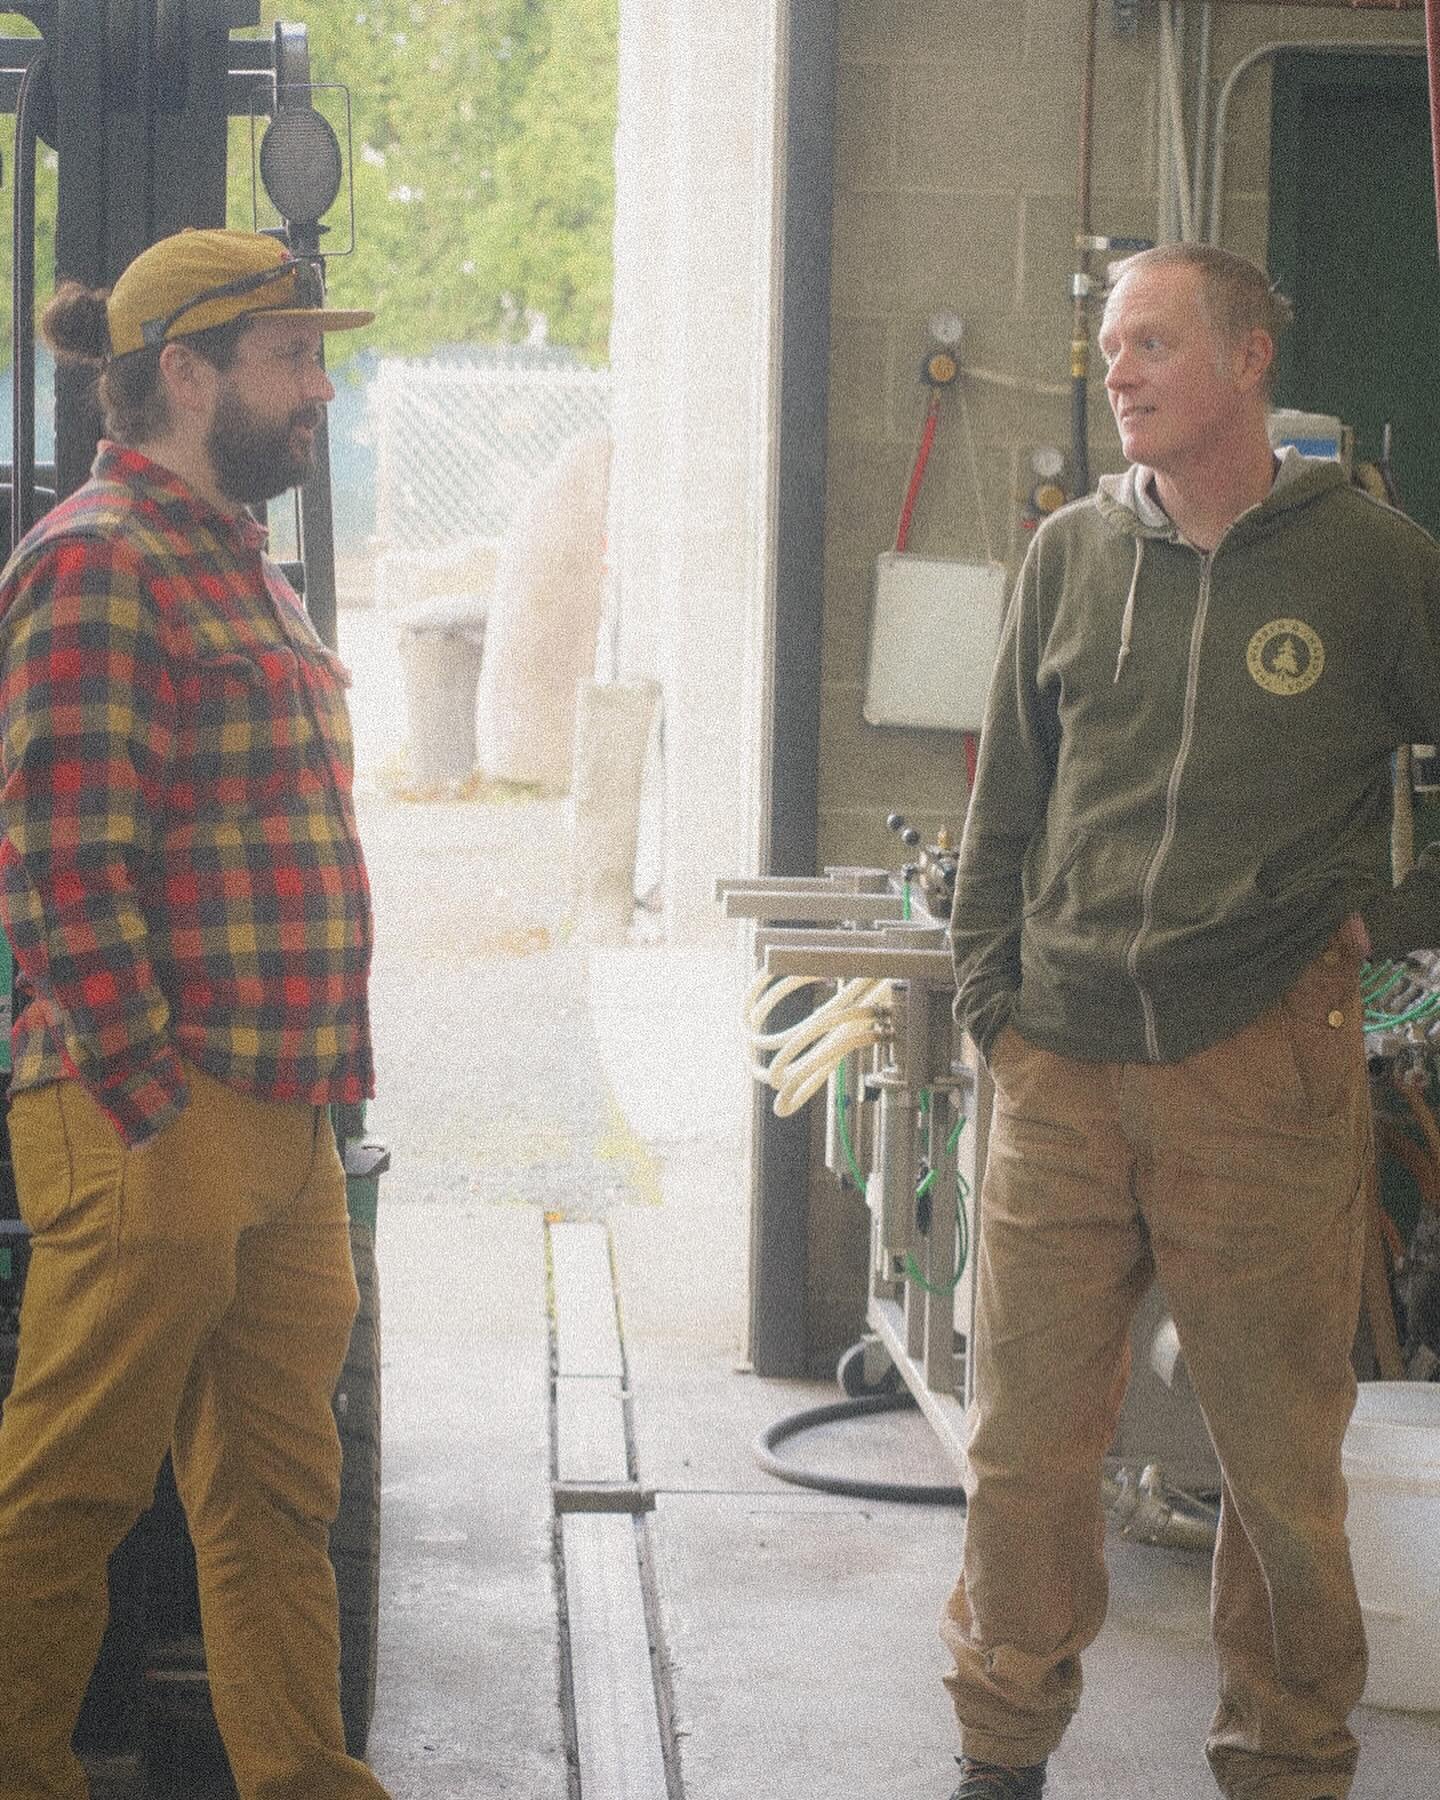 We had the distinct pleasure of brewing with the @lowercasebeer folks this week. We really love spending time with John and Chris and always learn something while chatting. Chris was fixing a part for the @douglaslagerbeer bottle line and John was ge